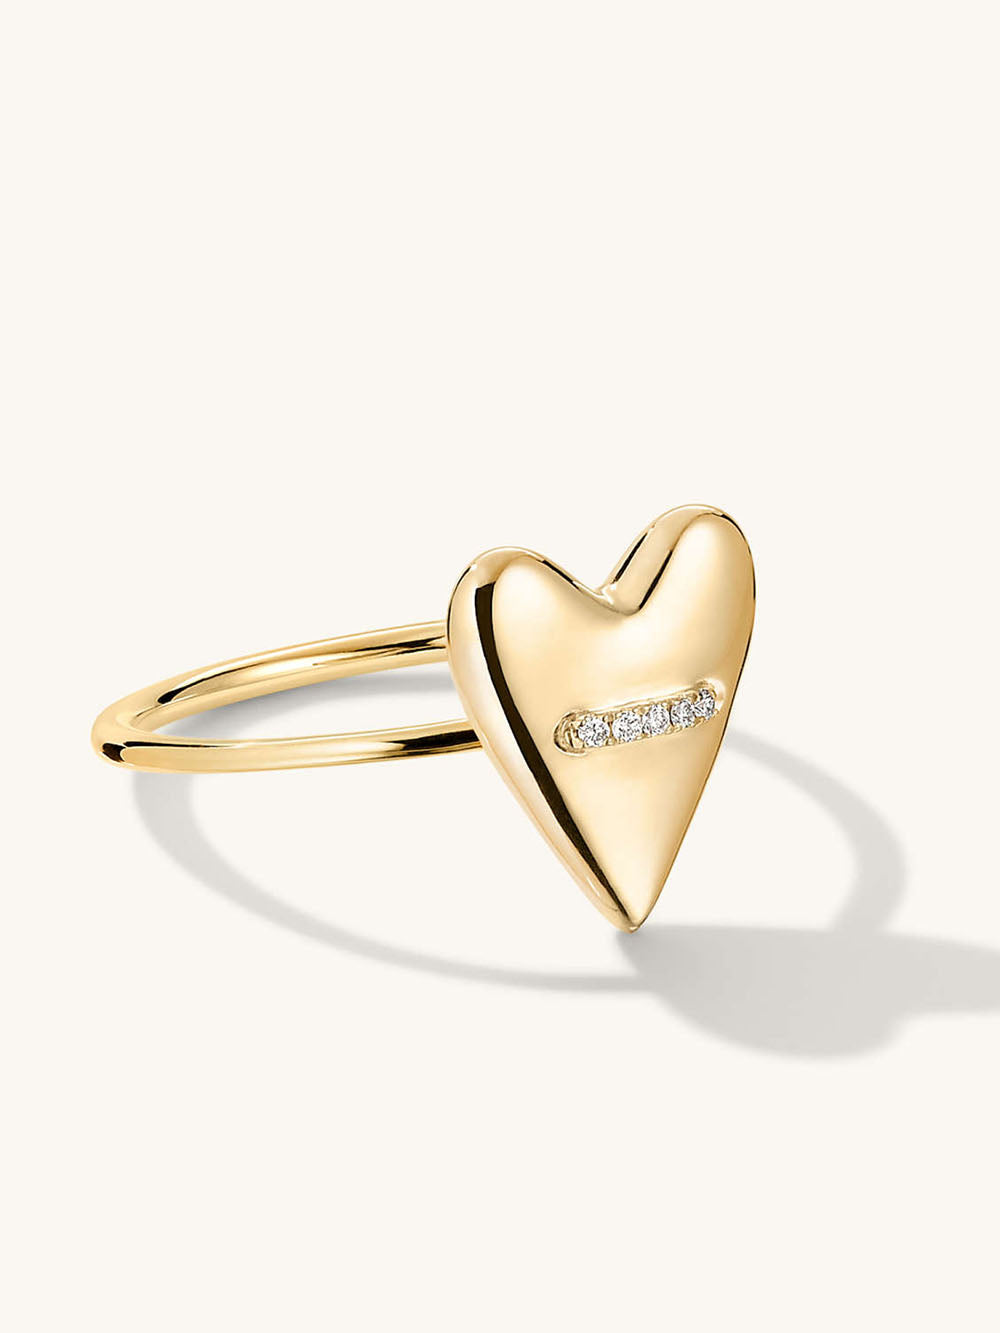 Image of slim ring with heart shape and set of diamonds